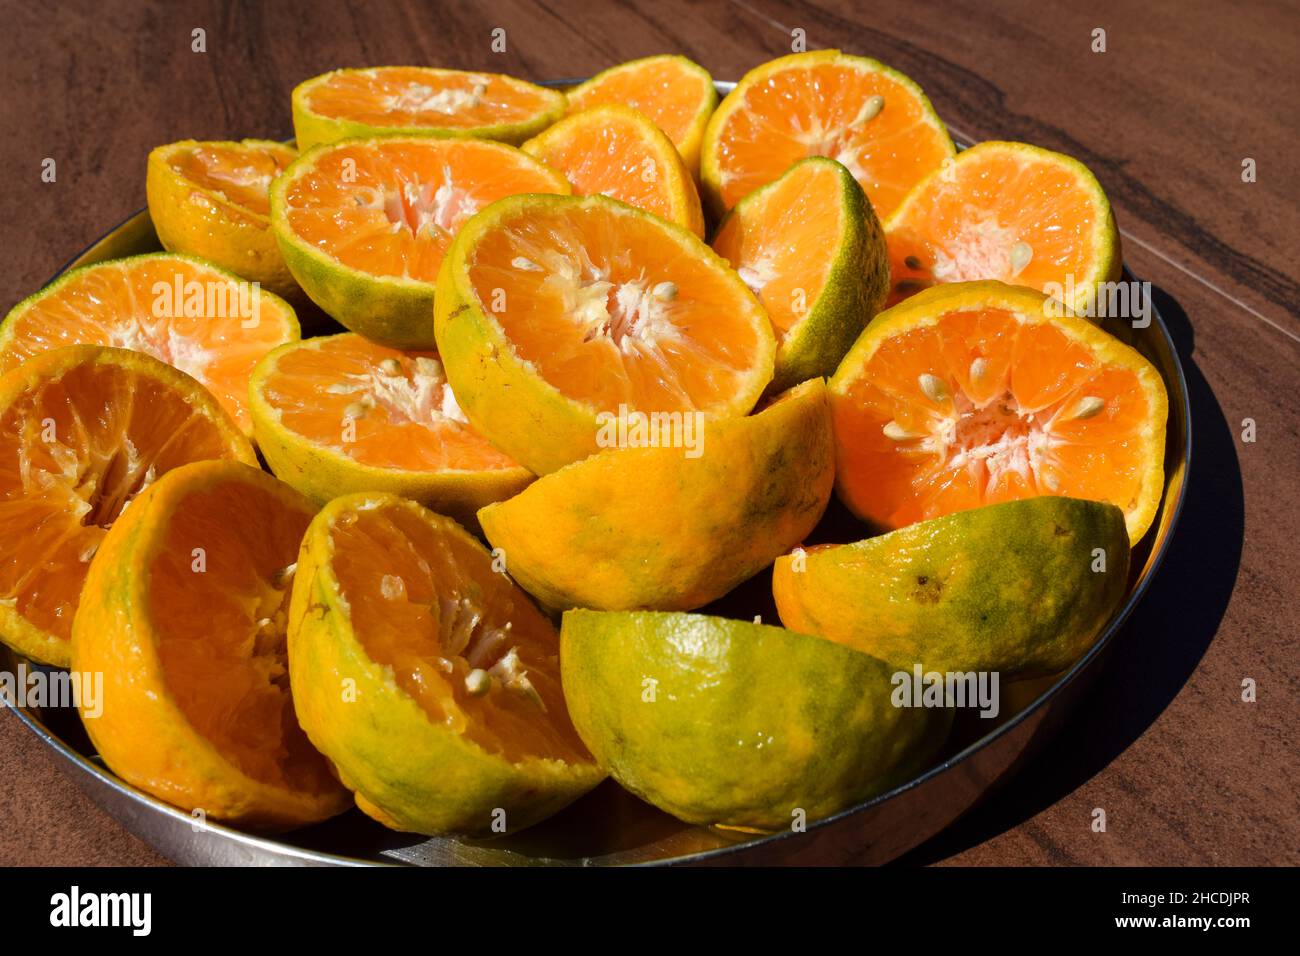 Orange, Malta fruits sliced in to half to take out juice Stock Photo